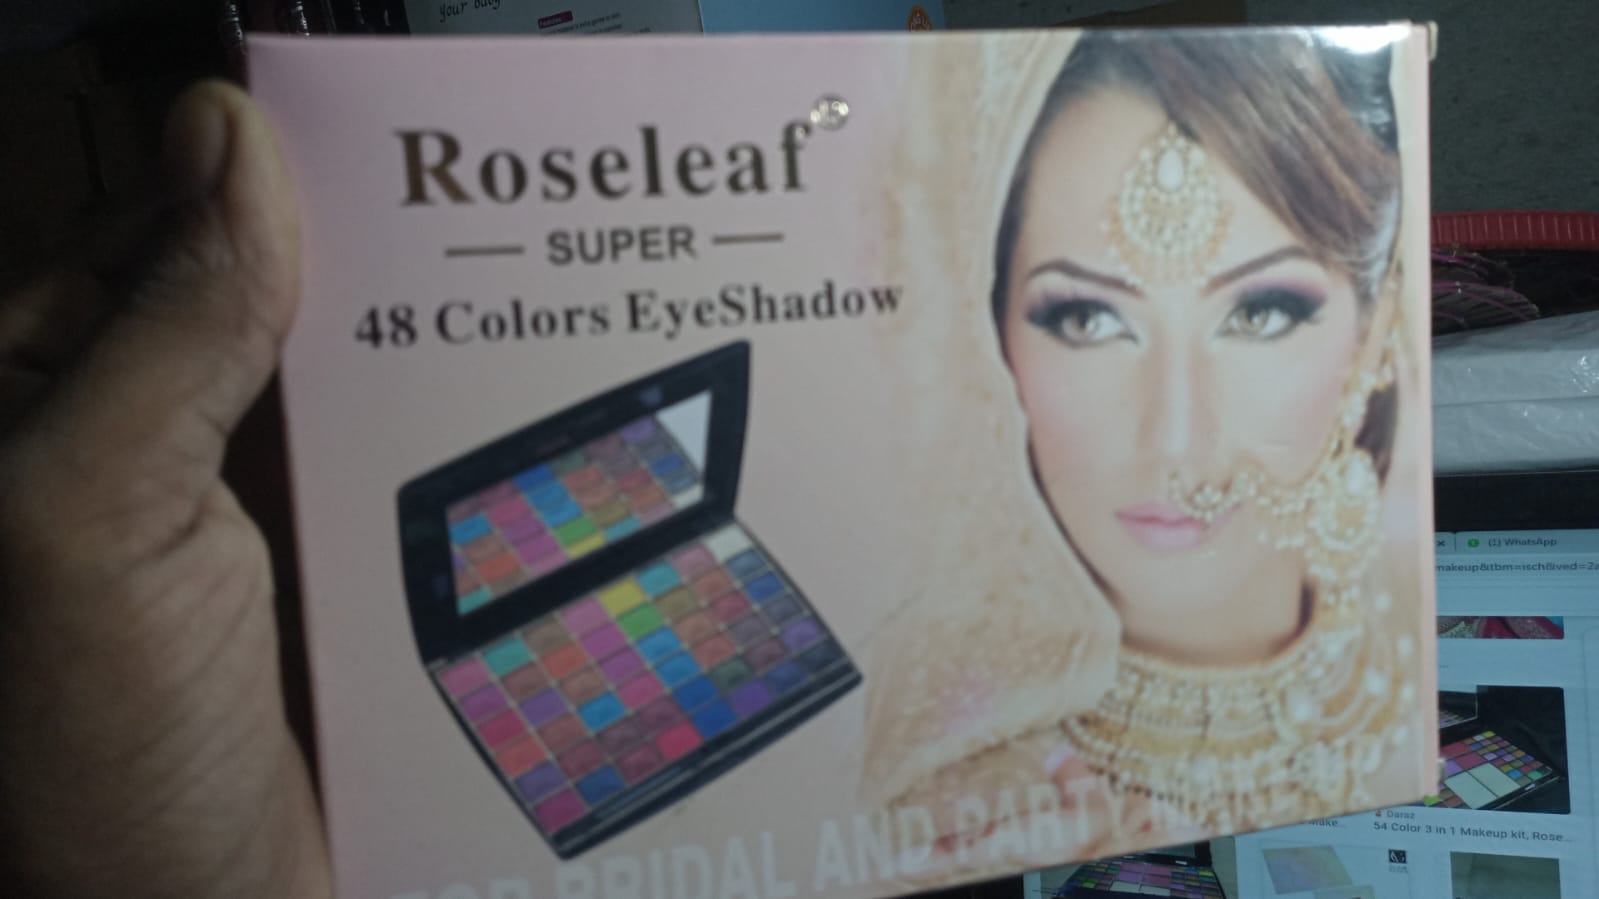 Roseleaf super 48 color for bridal and party makeup eyeshdow